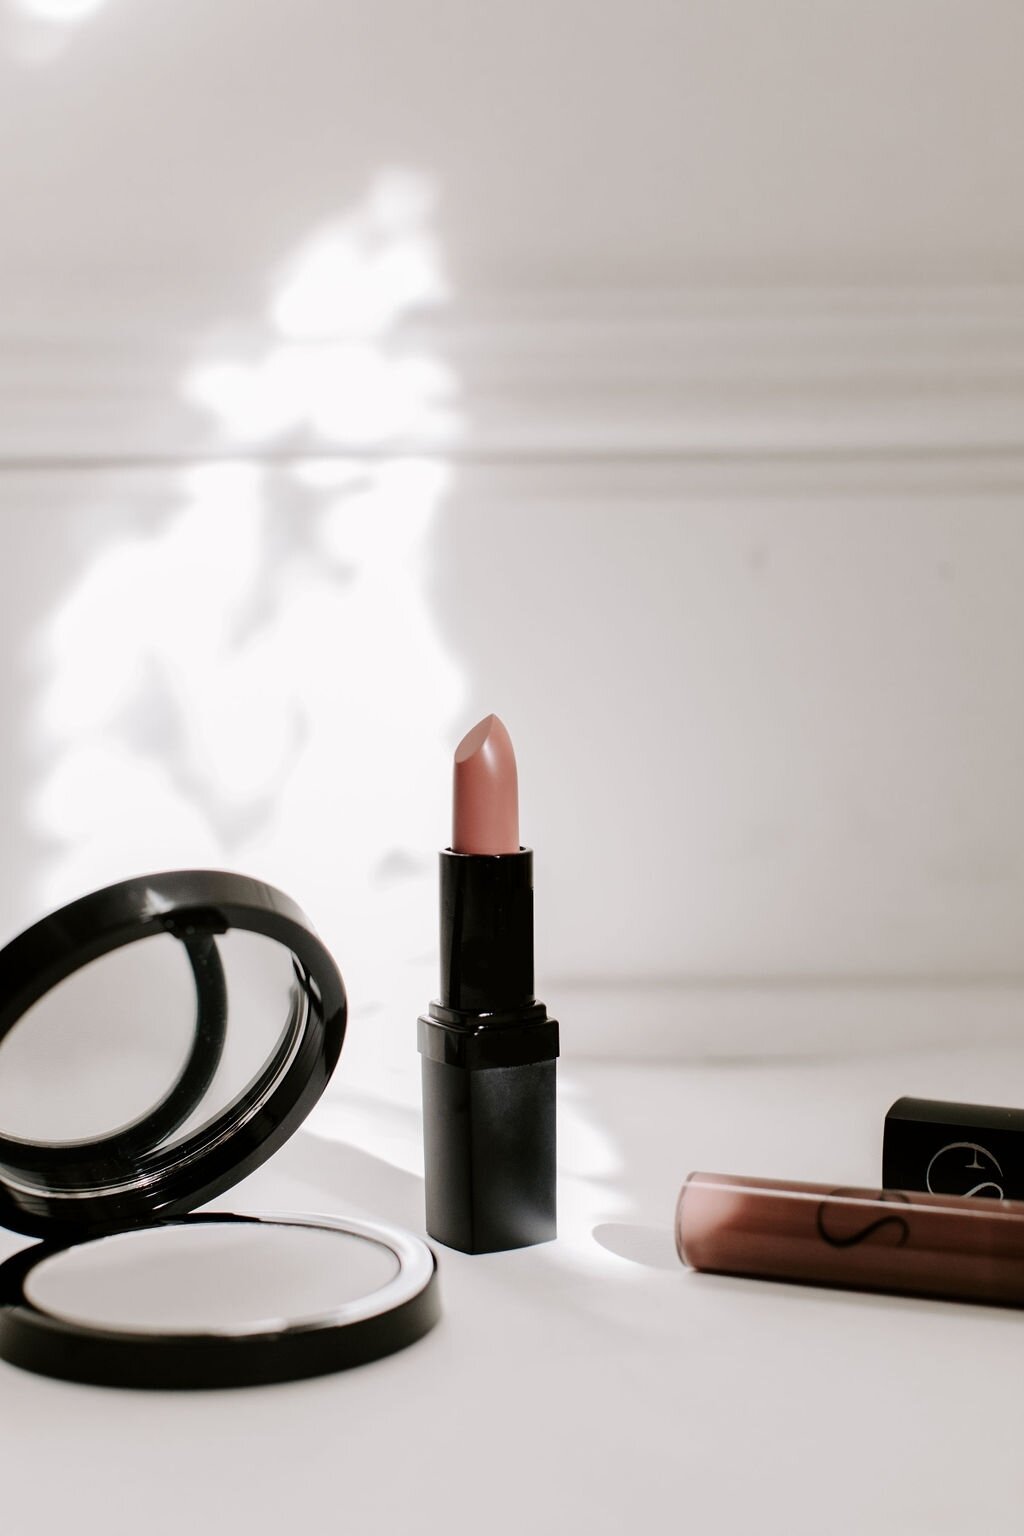 Our touch-up collection is live on our site! Our Loki Jane lipstick is back, our favourite lips that look like your natural colour but a little bit more. Perfect for non lipstick wearers. We have added our newest product the Olly lipgloss for a sligh